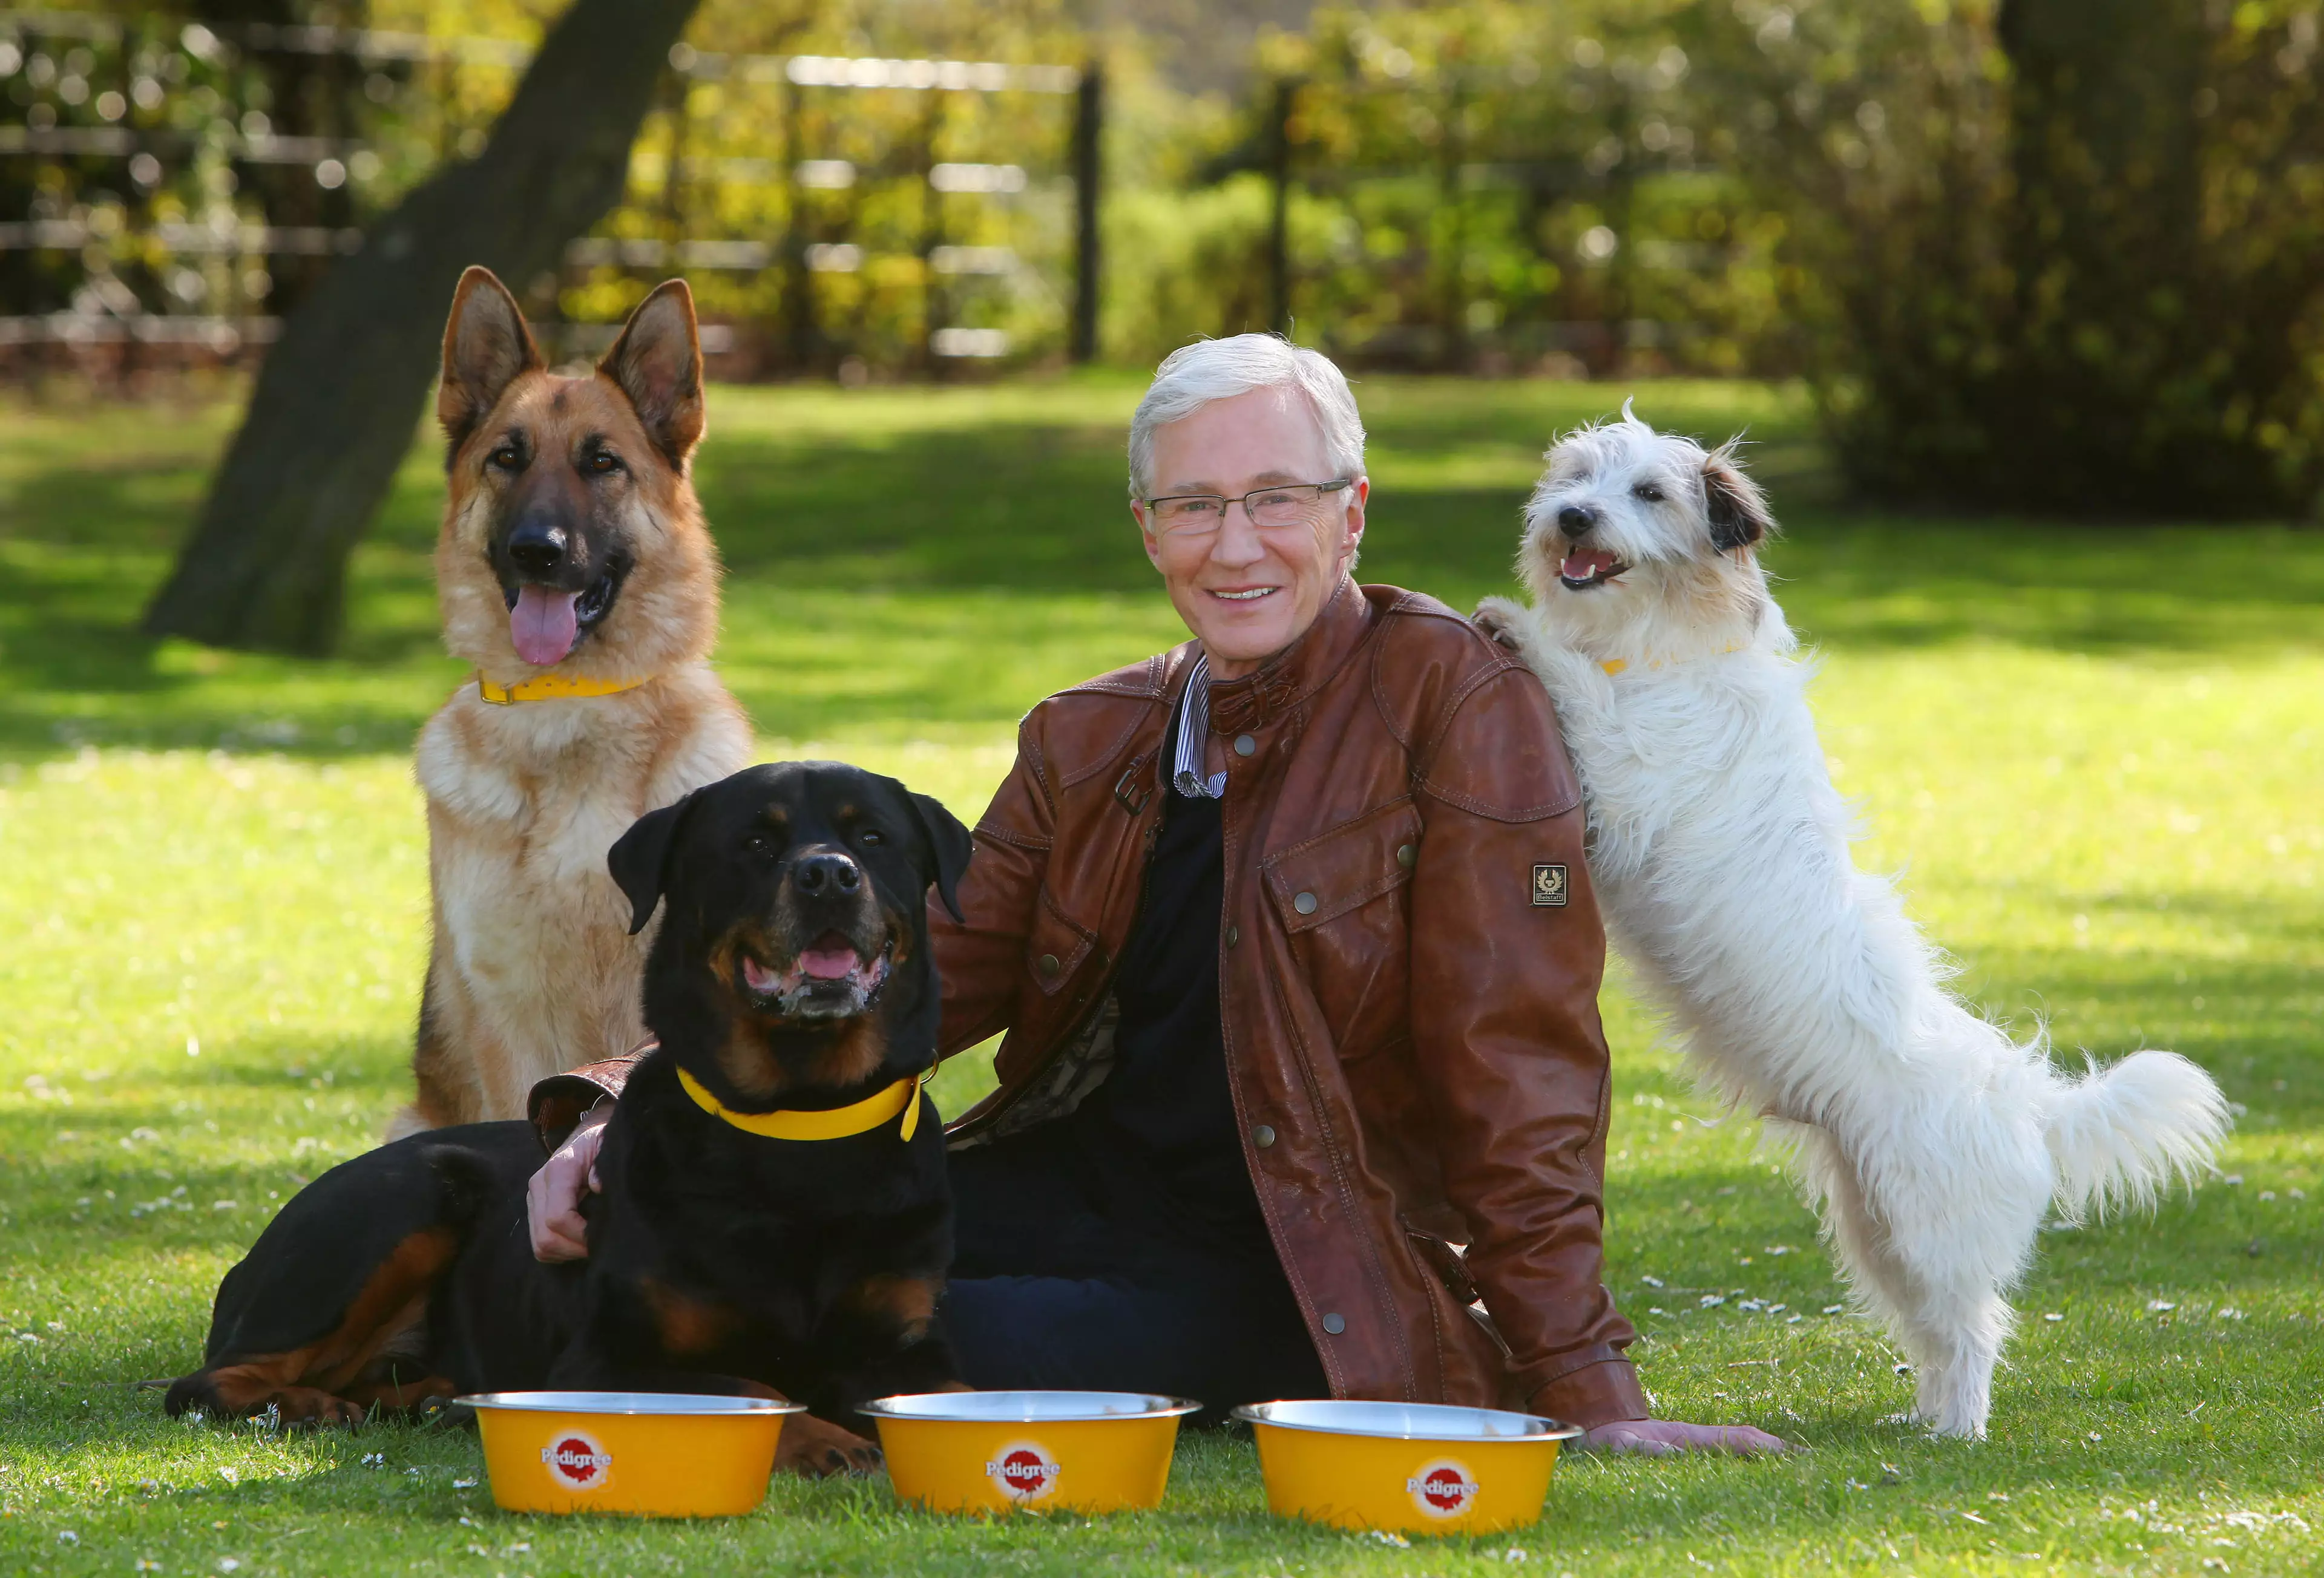 Paul O'Grady, surrounded by dogs.